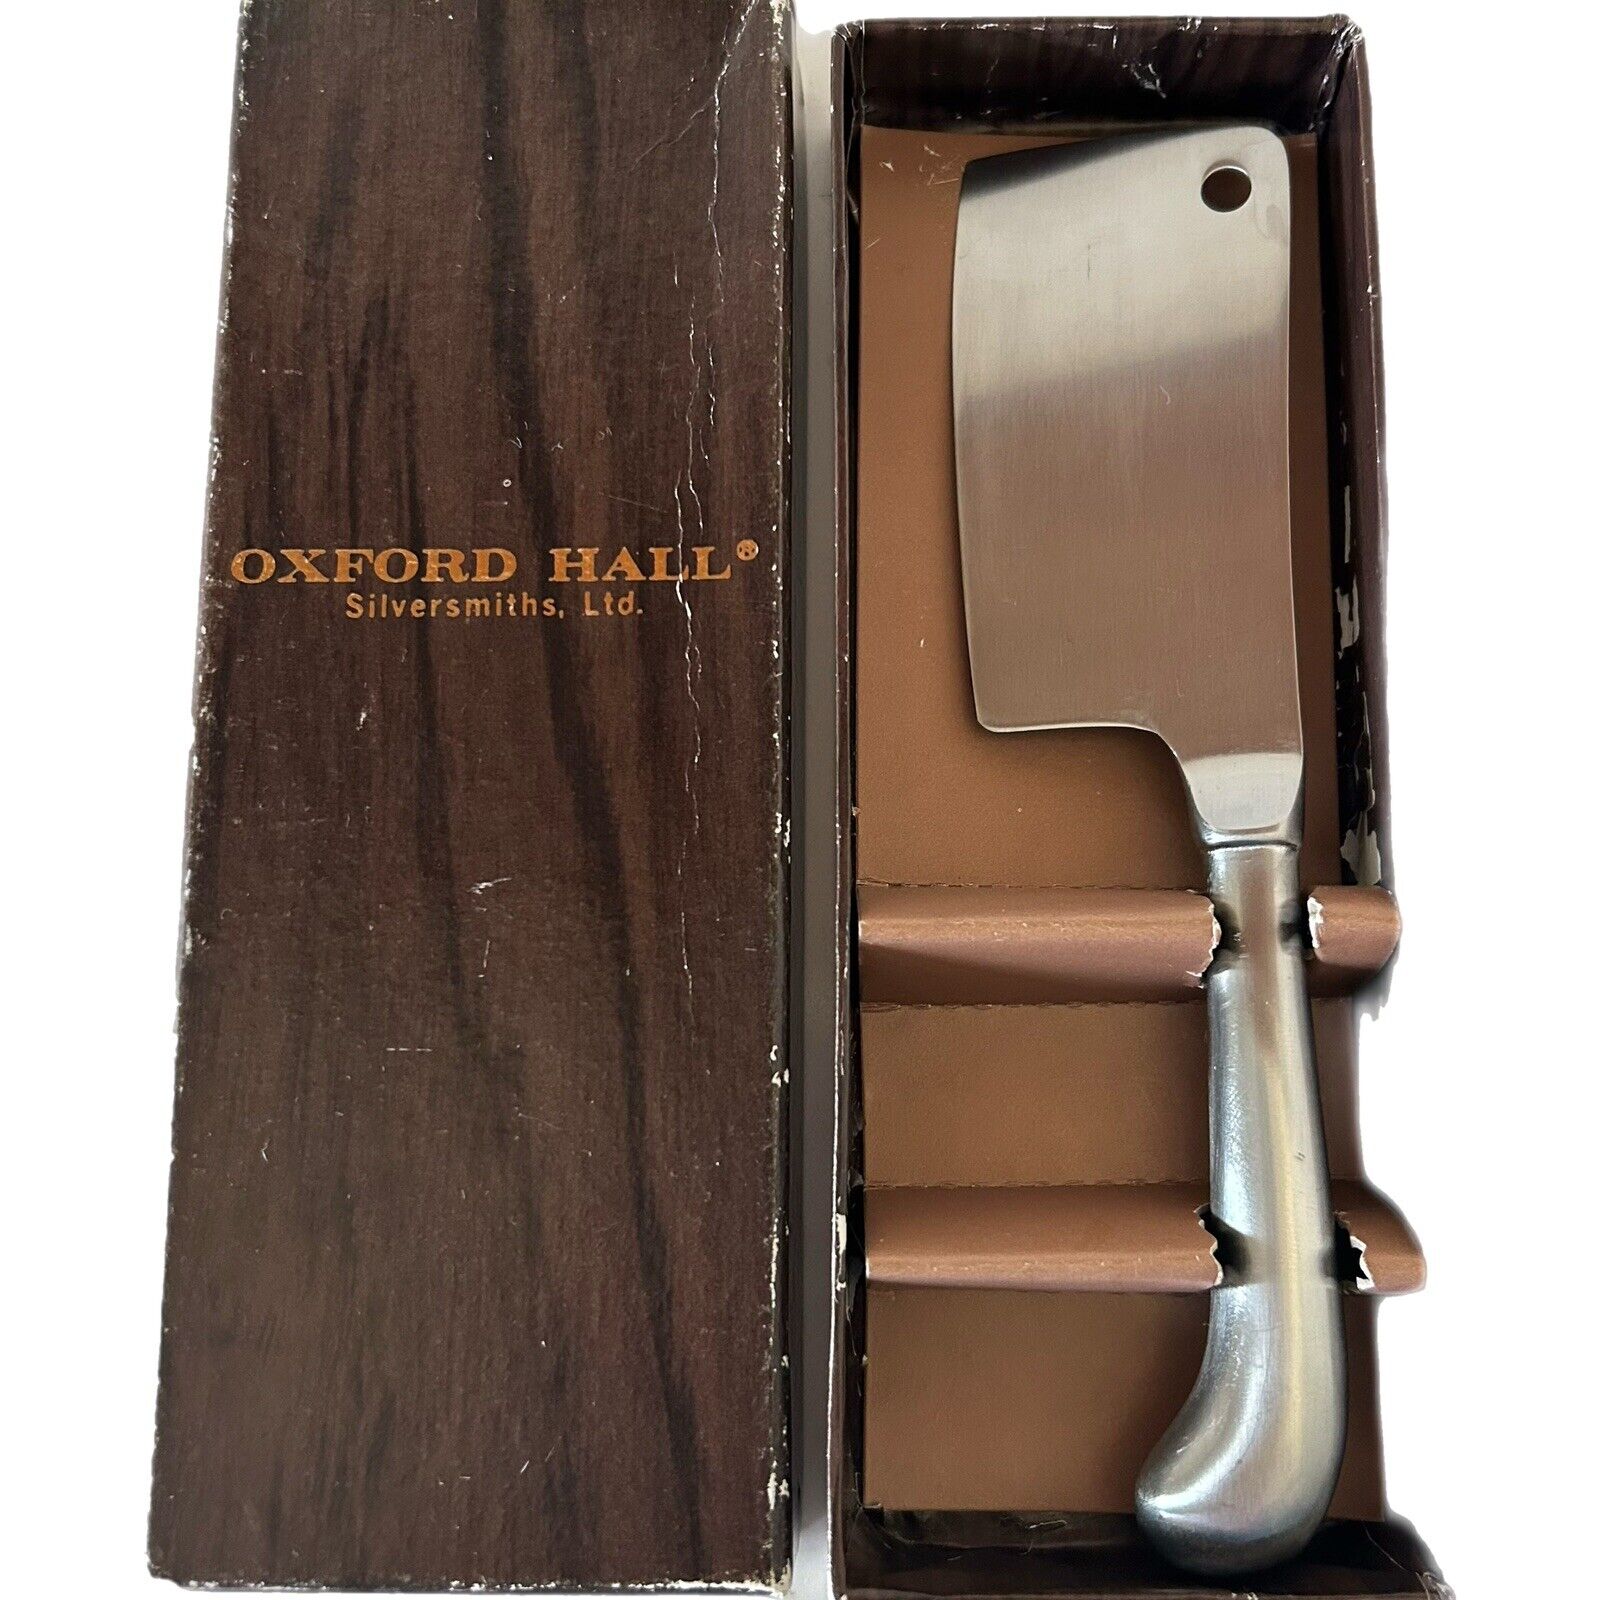 Vintage Oxford Hall Stainless Steel Japan Cheese Cleaver Silversmiths Ltd